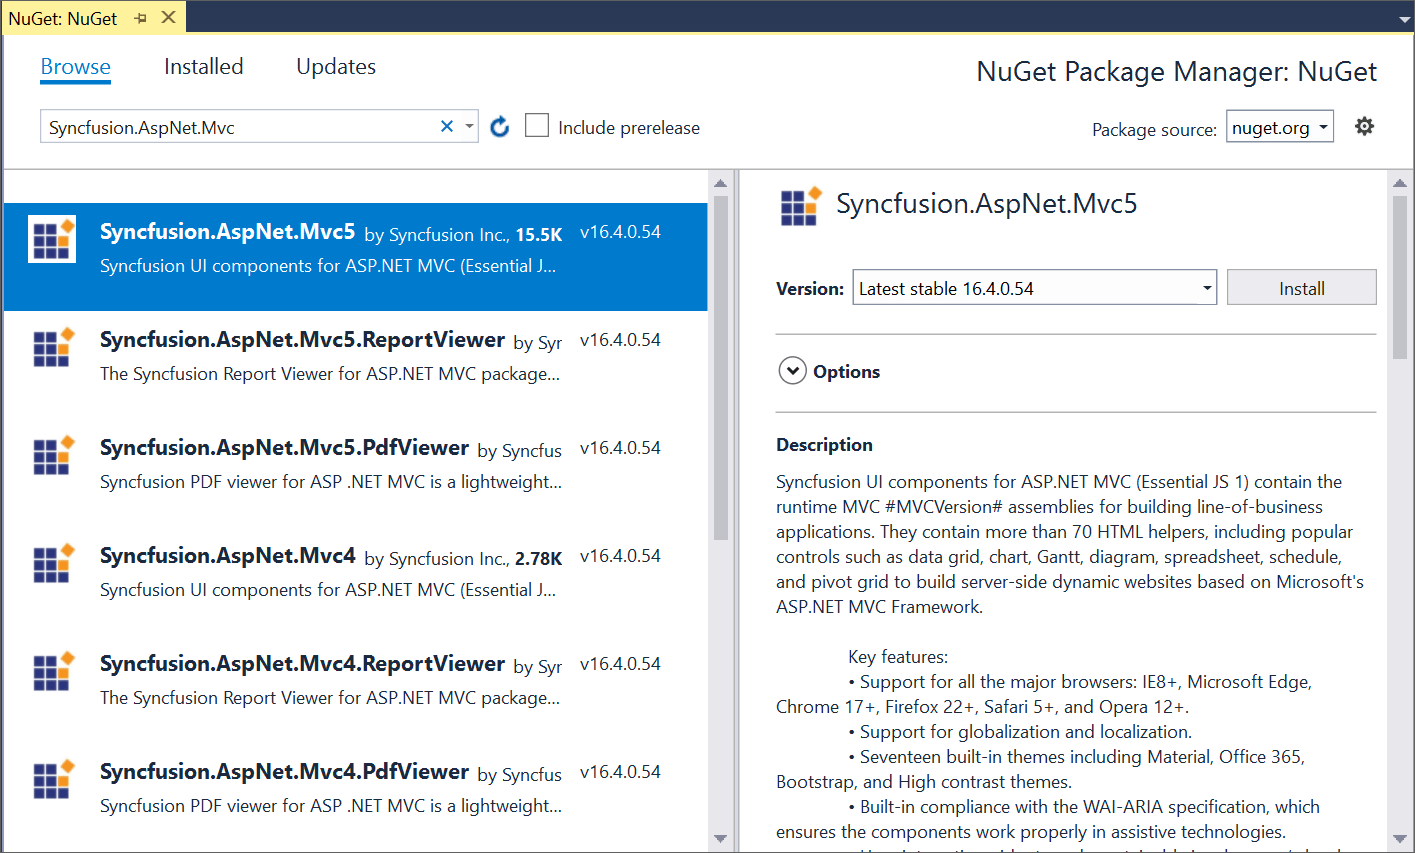 NuGet package manager dialog window